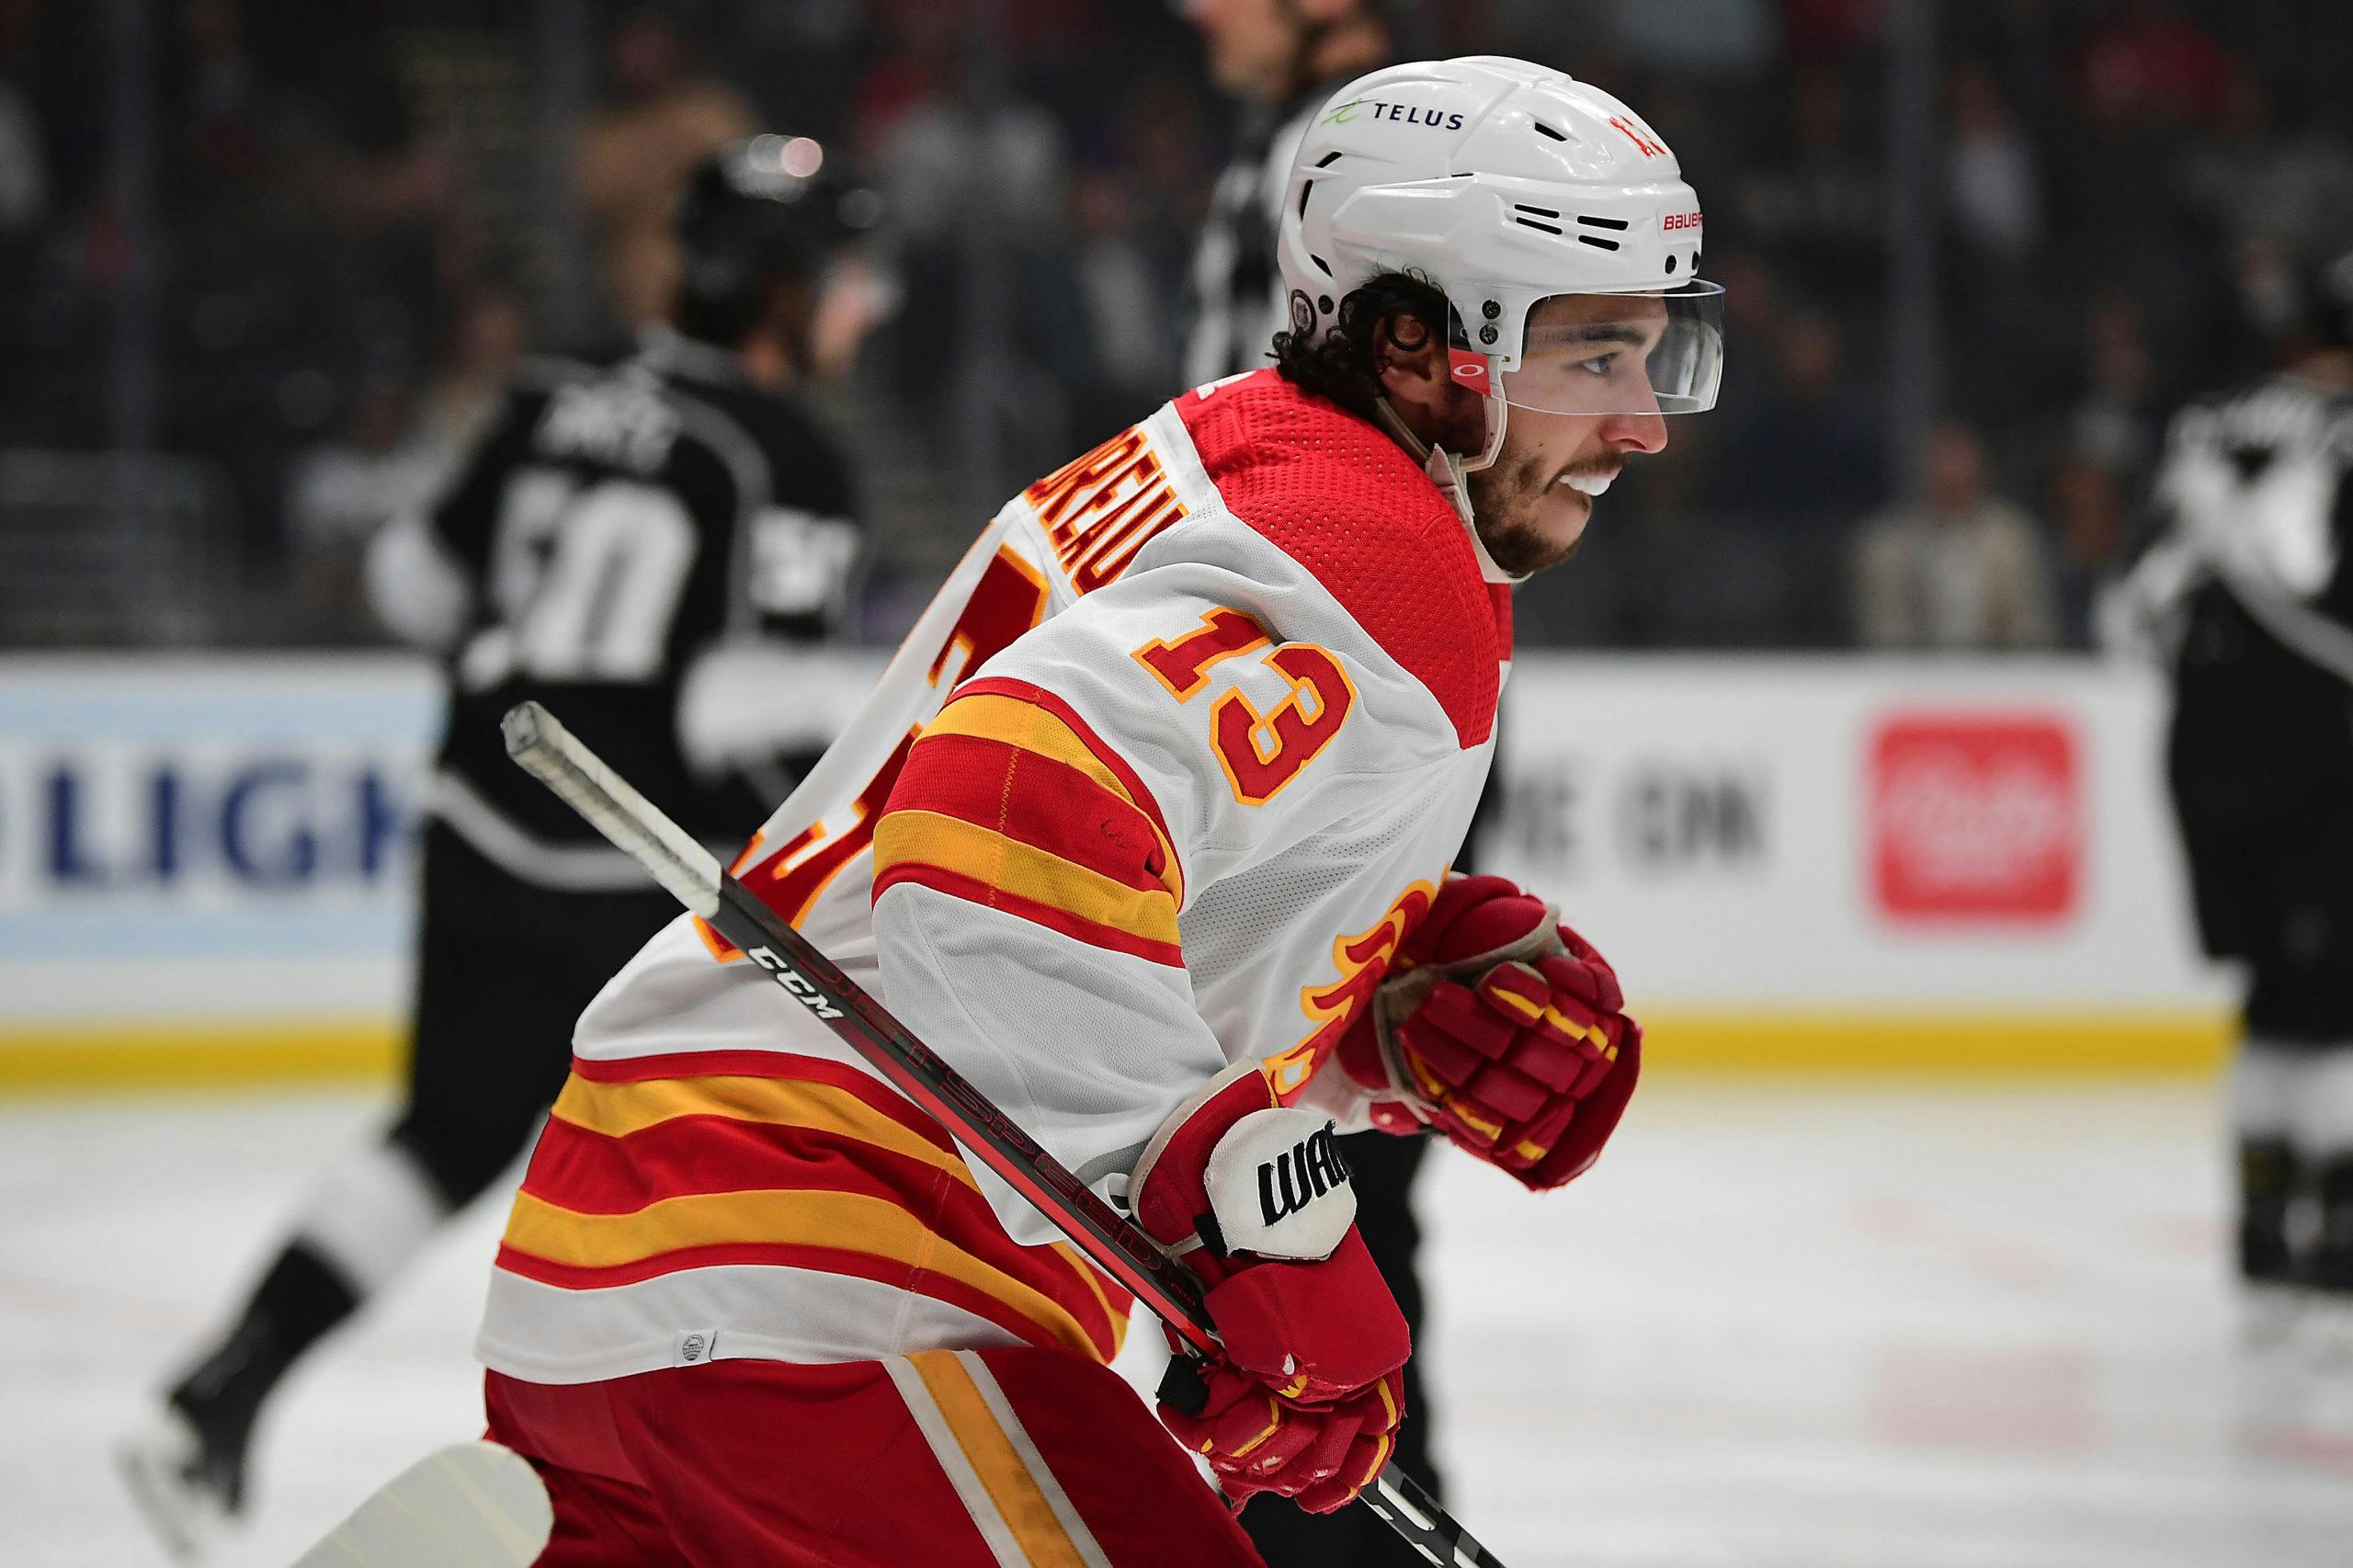 A brief history of Flames jerseys - FlamesNation